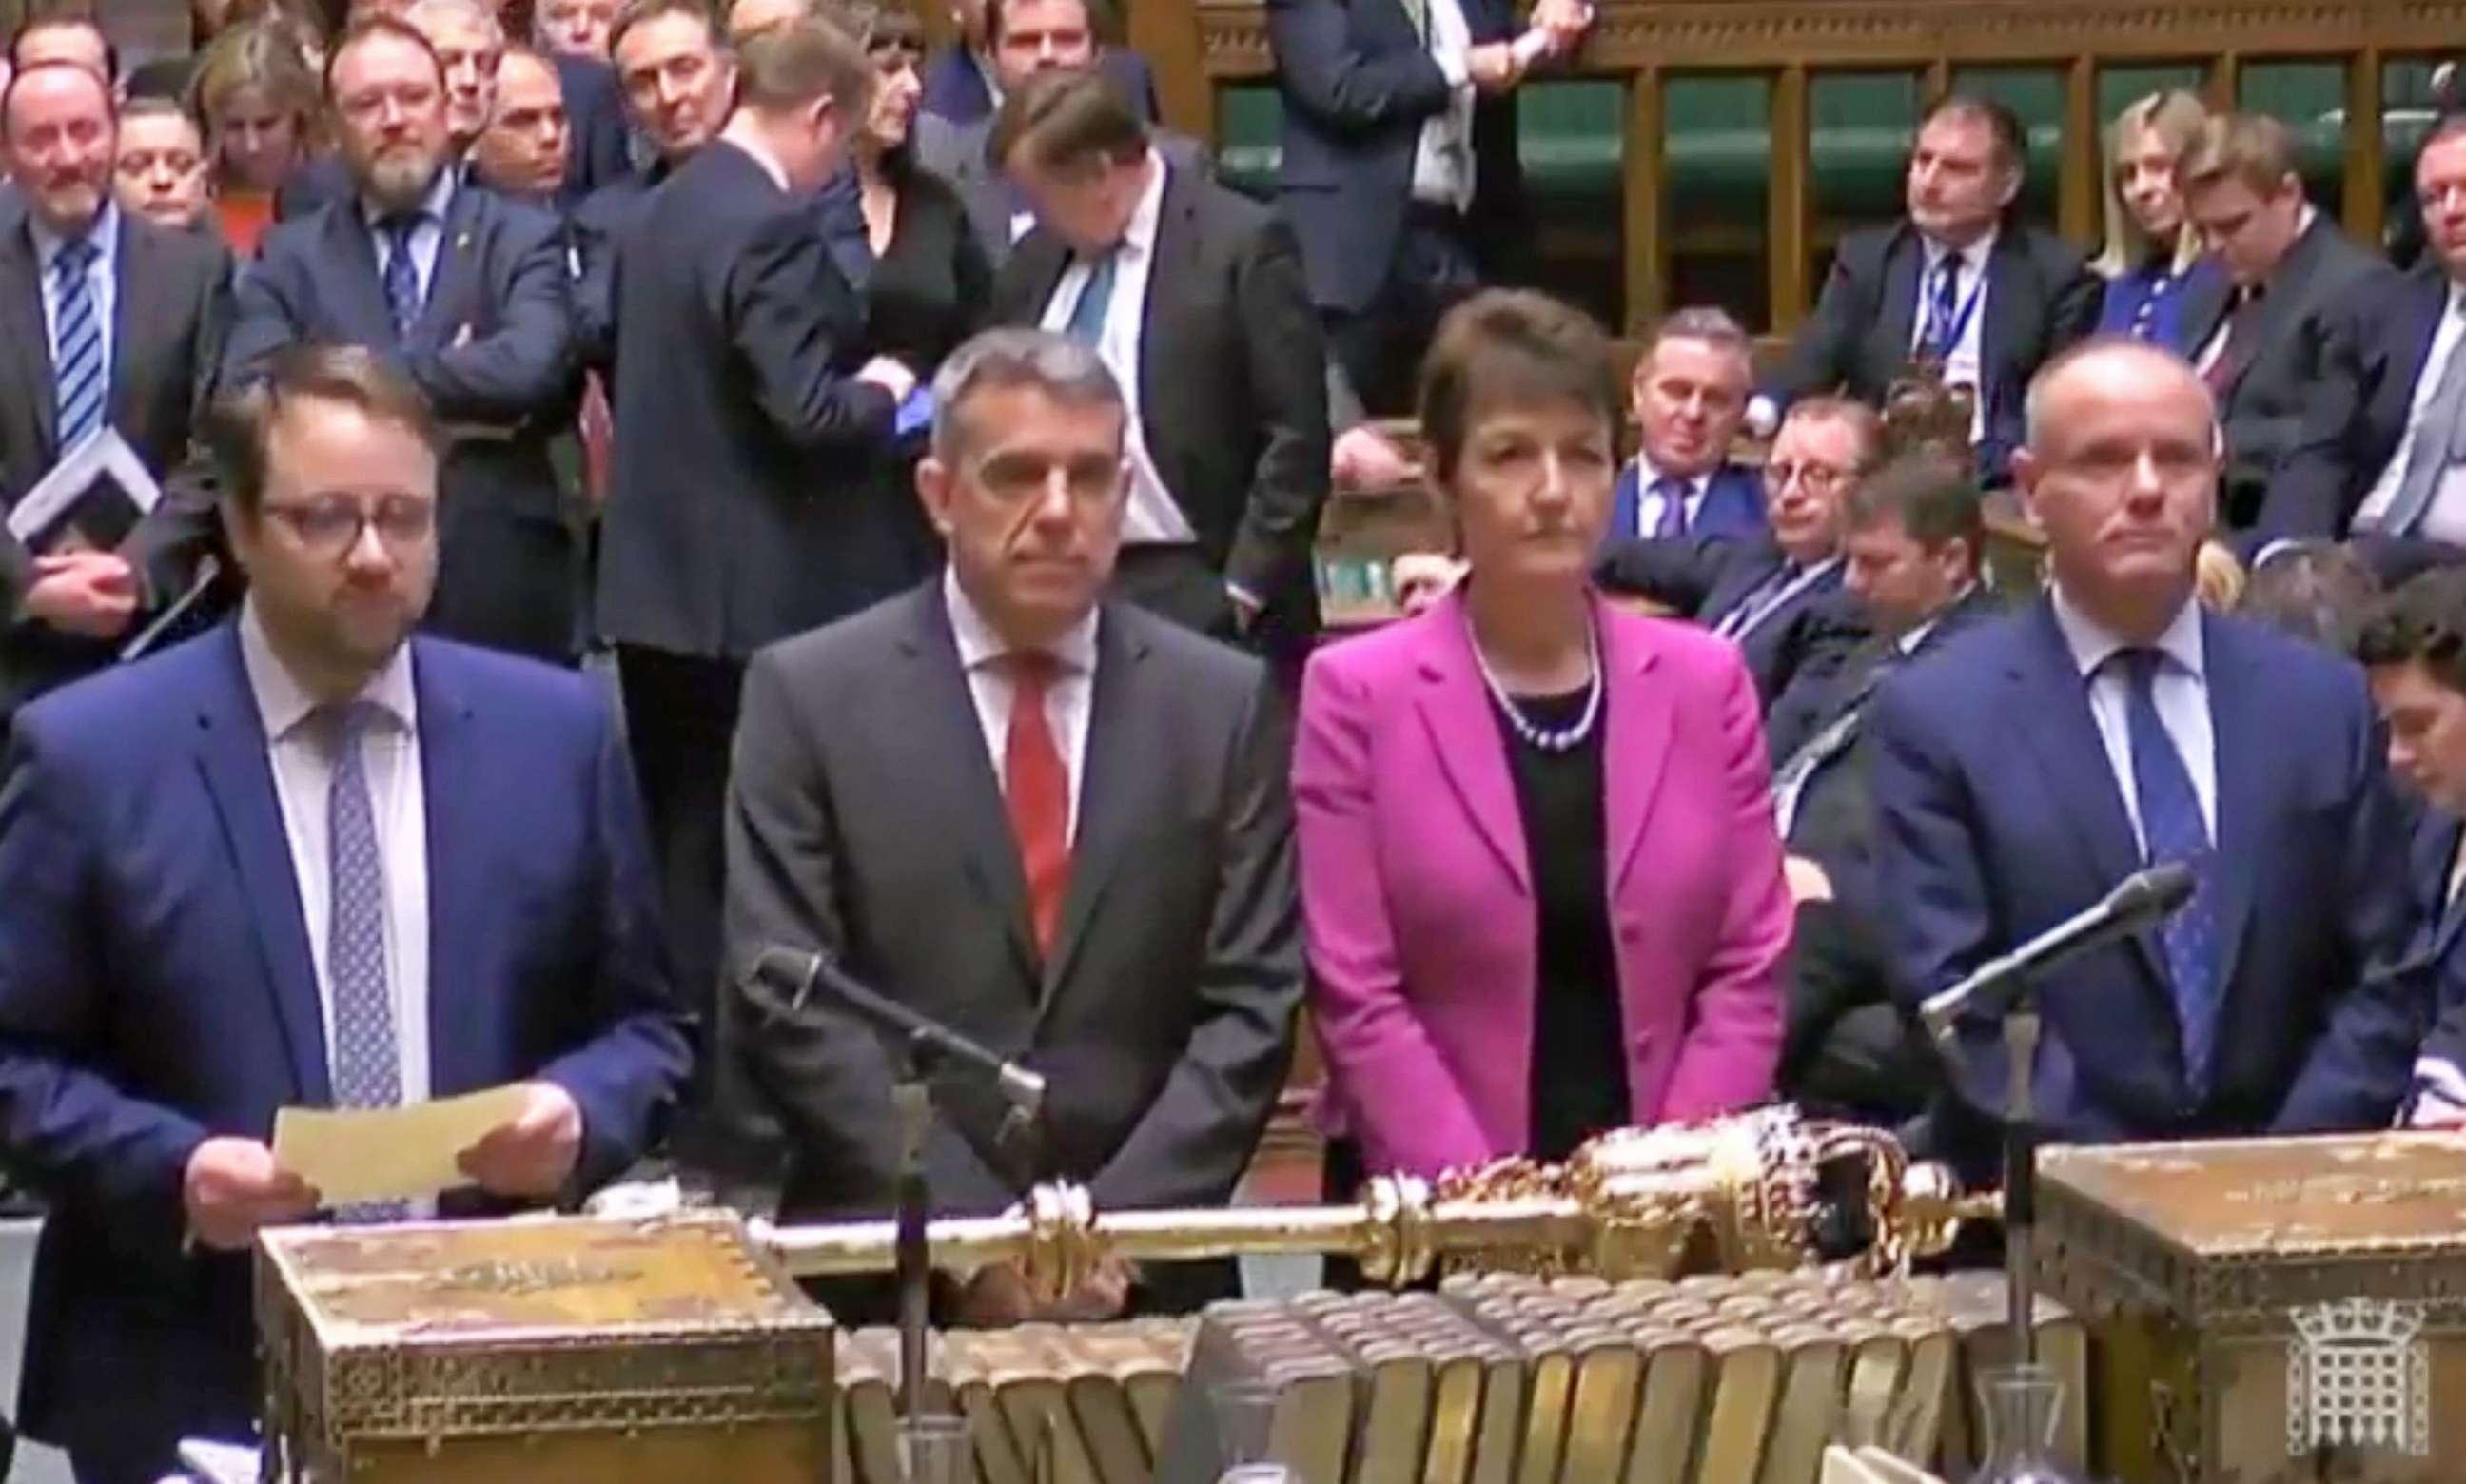 PHOTO: A grab from a handout video shows the four tellers announcing the result of the business motion to the Speaker of the House in the British House of Commons at Westminster, London, March 27, 2019.